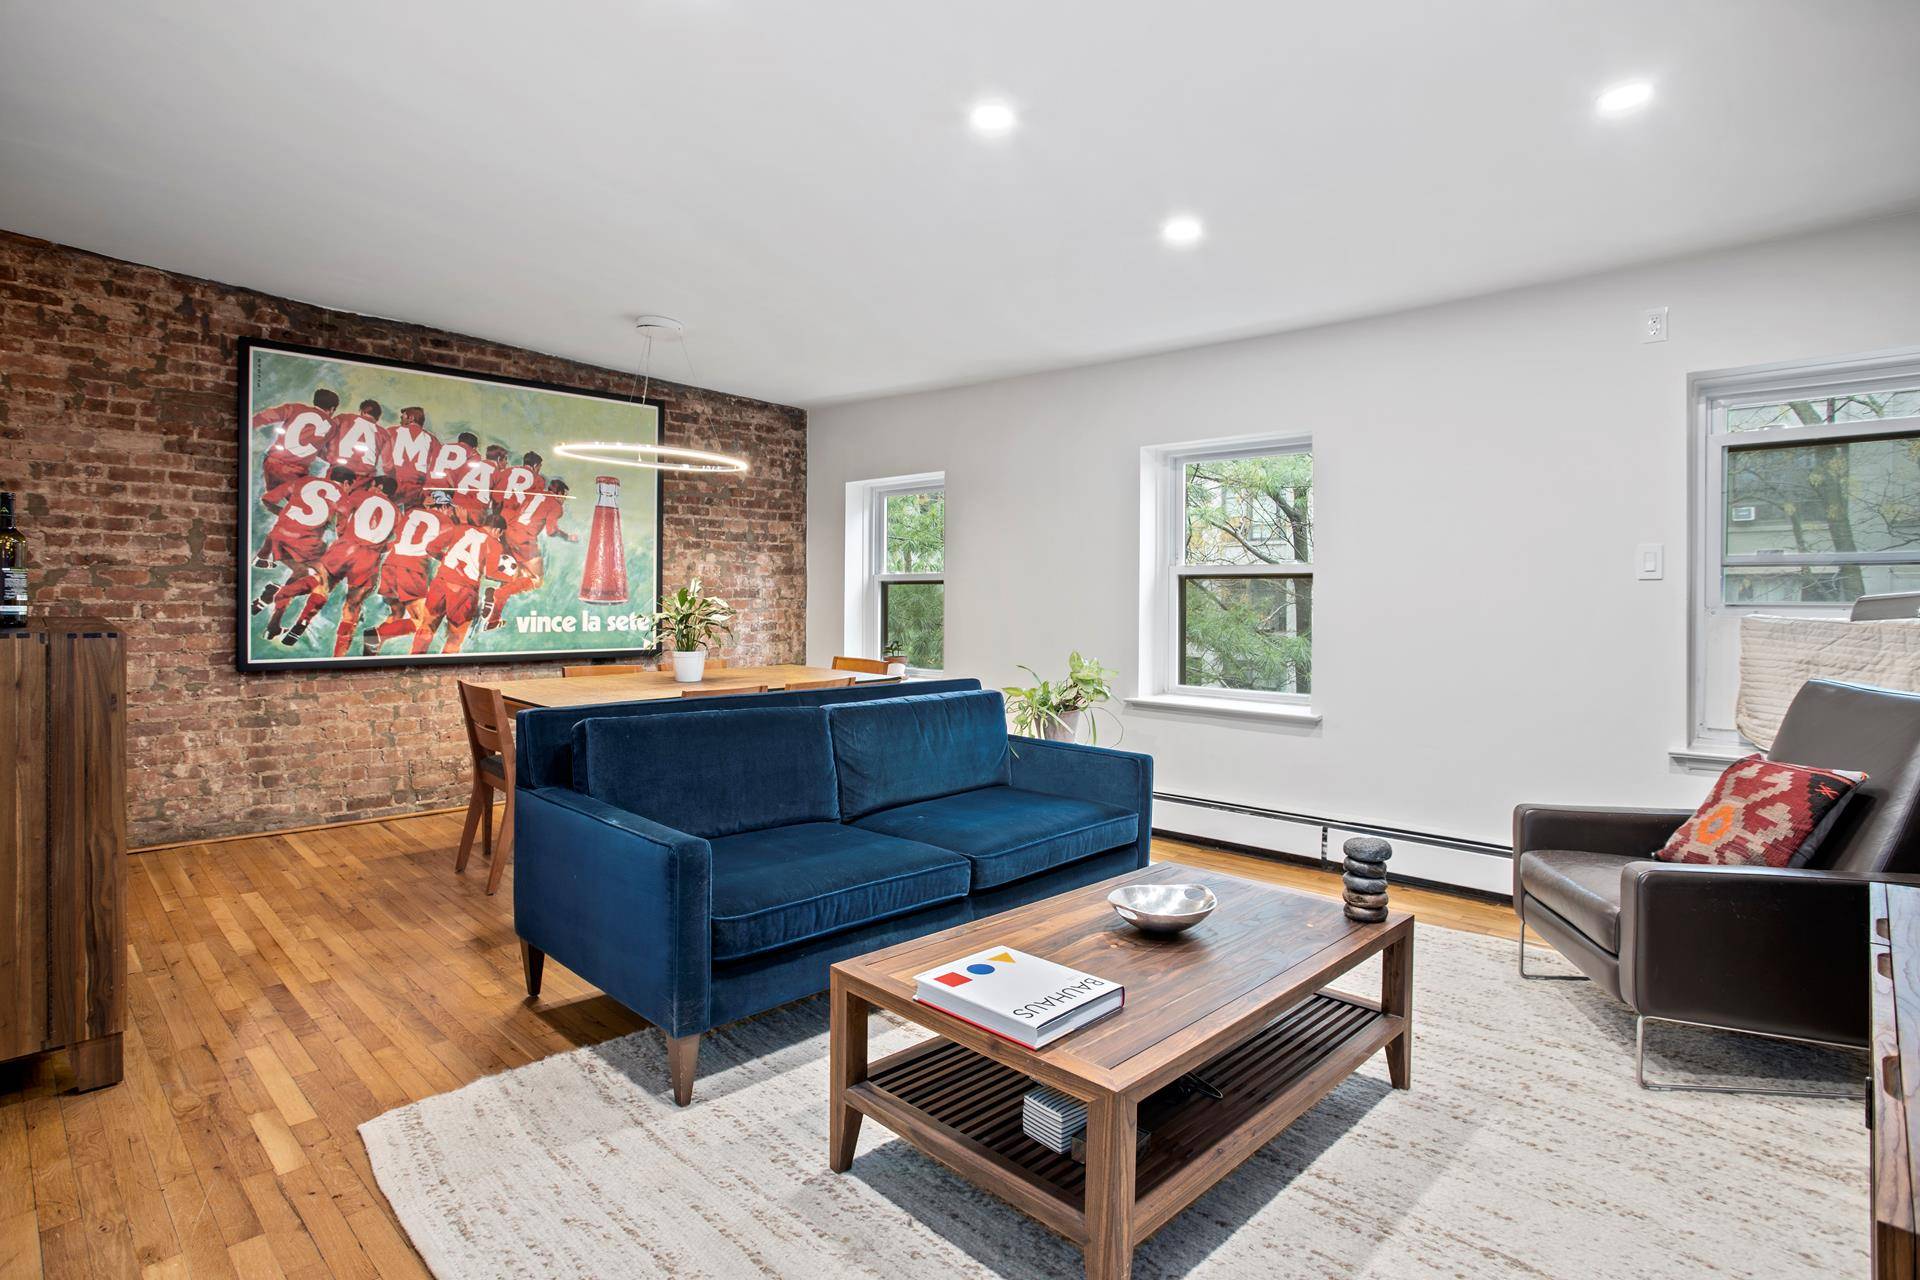 Brand new to the market an amazing EASTERN facing 2 bed 1 bath coop unit in Carroll Gardens overlooking the beautiful tree lined private courtyard.